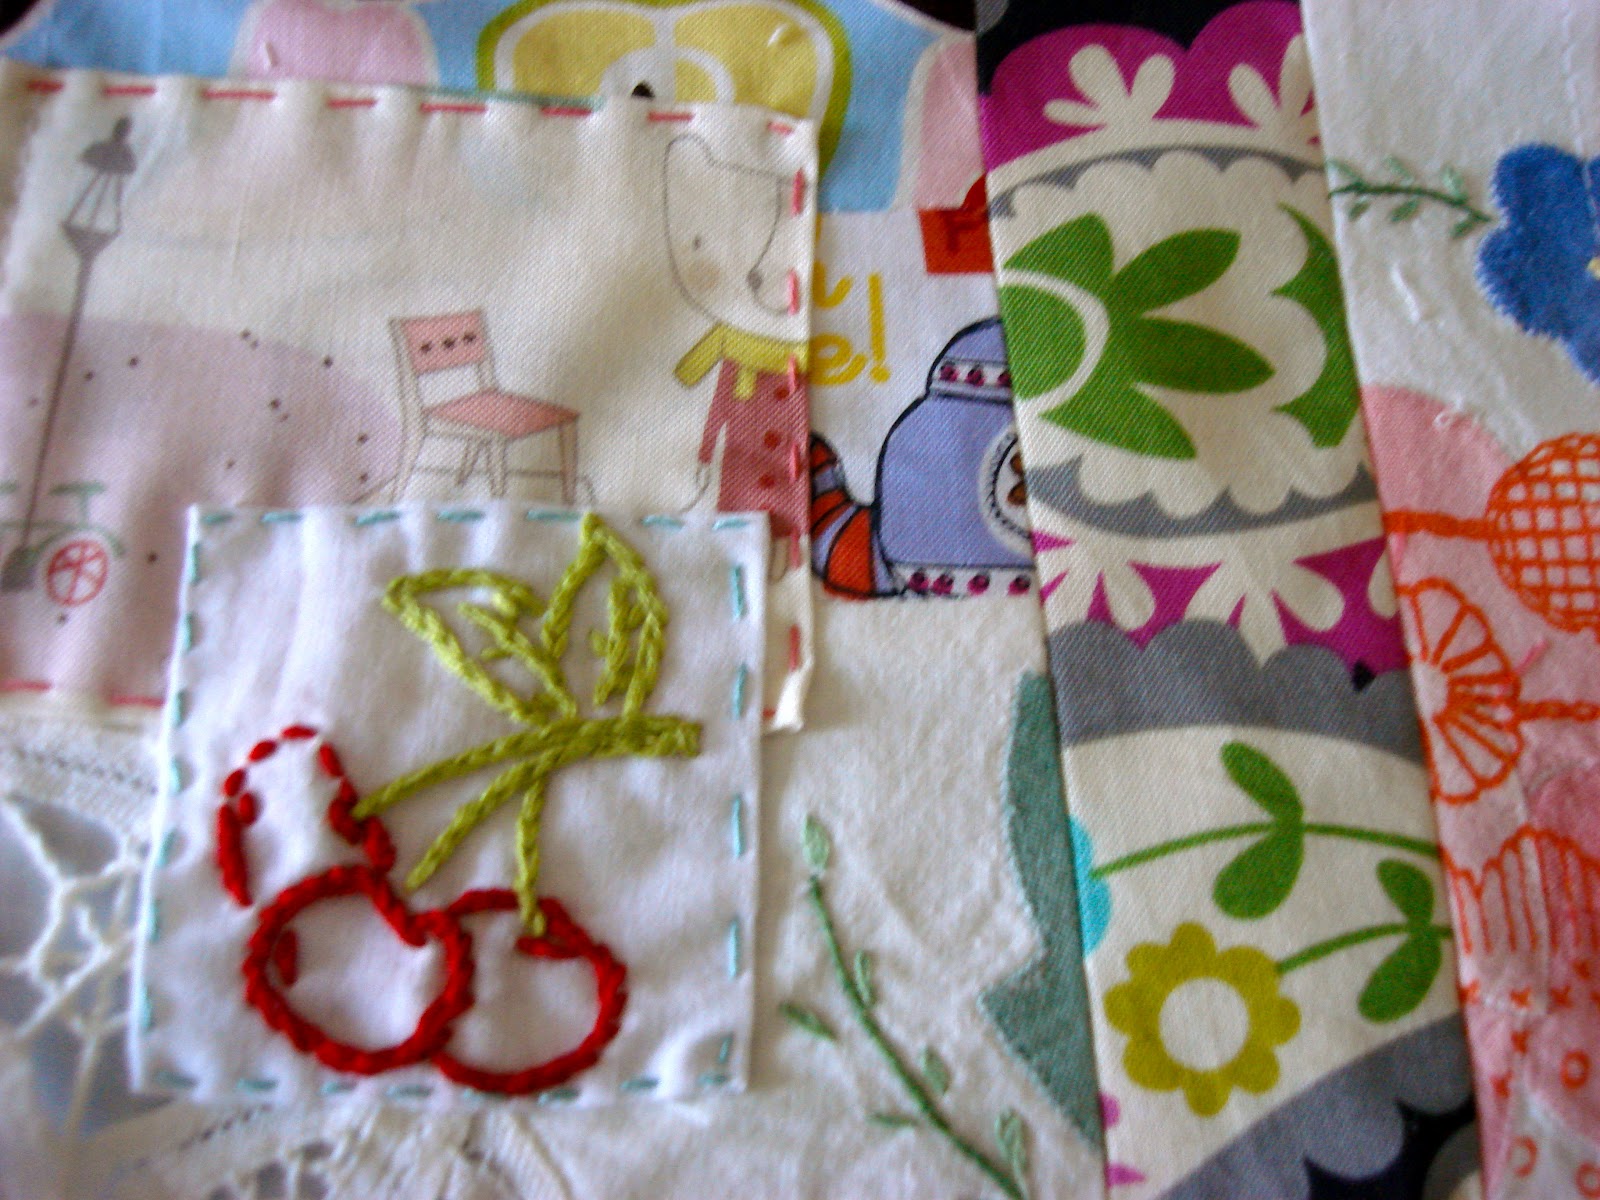 feeling stitchy: Review: Stitcharama Embroidery Transfers